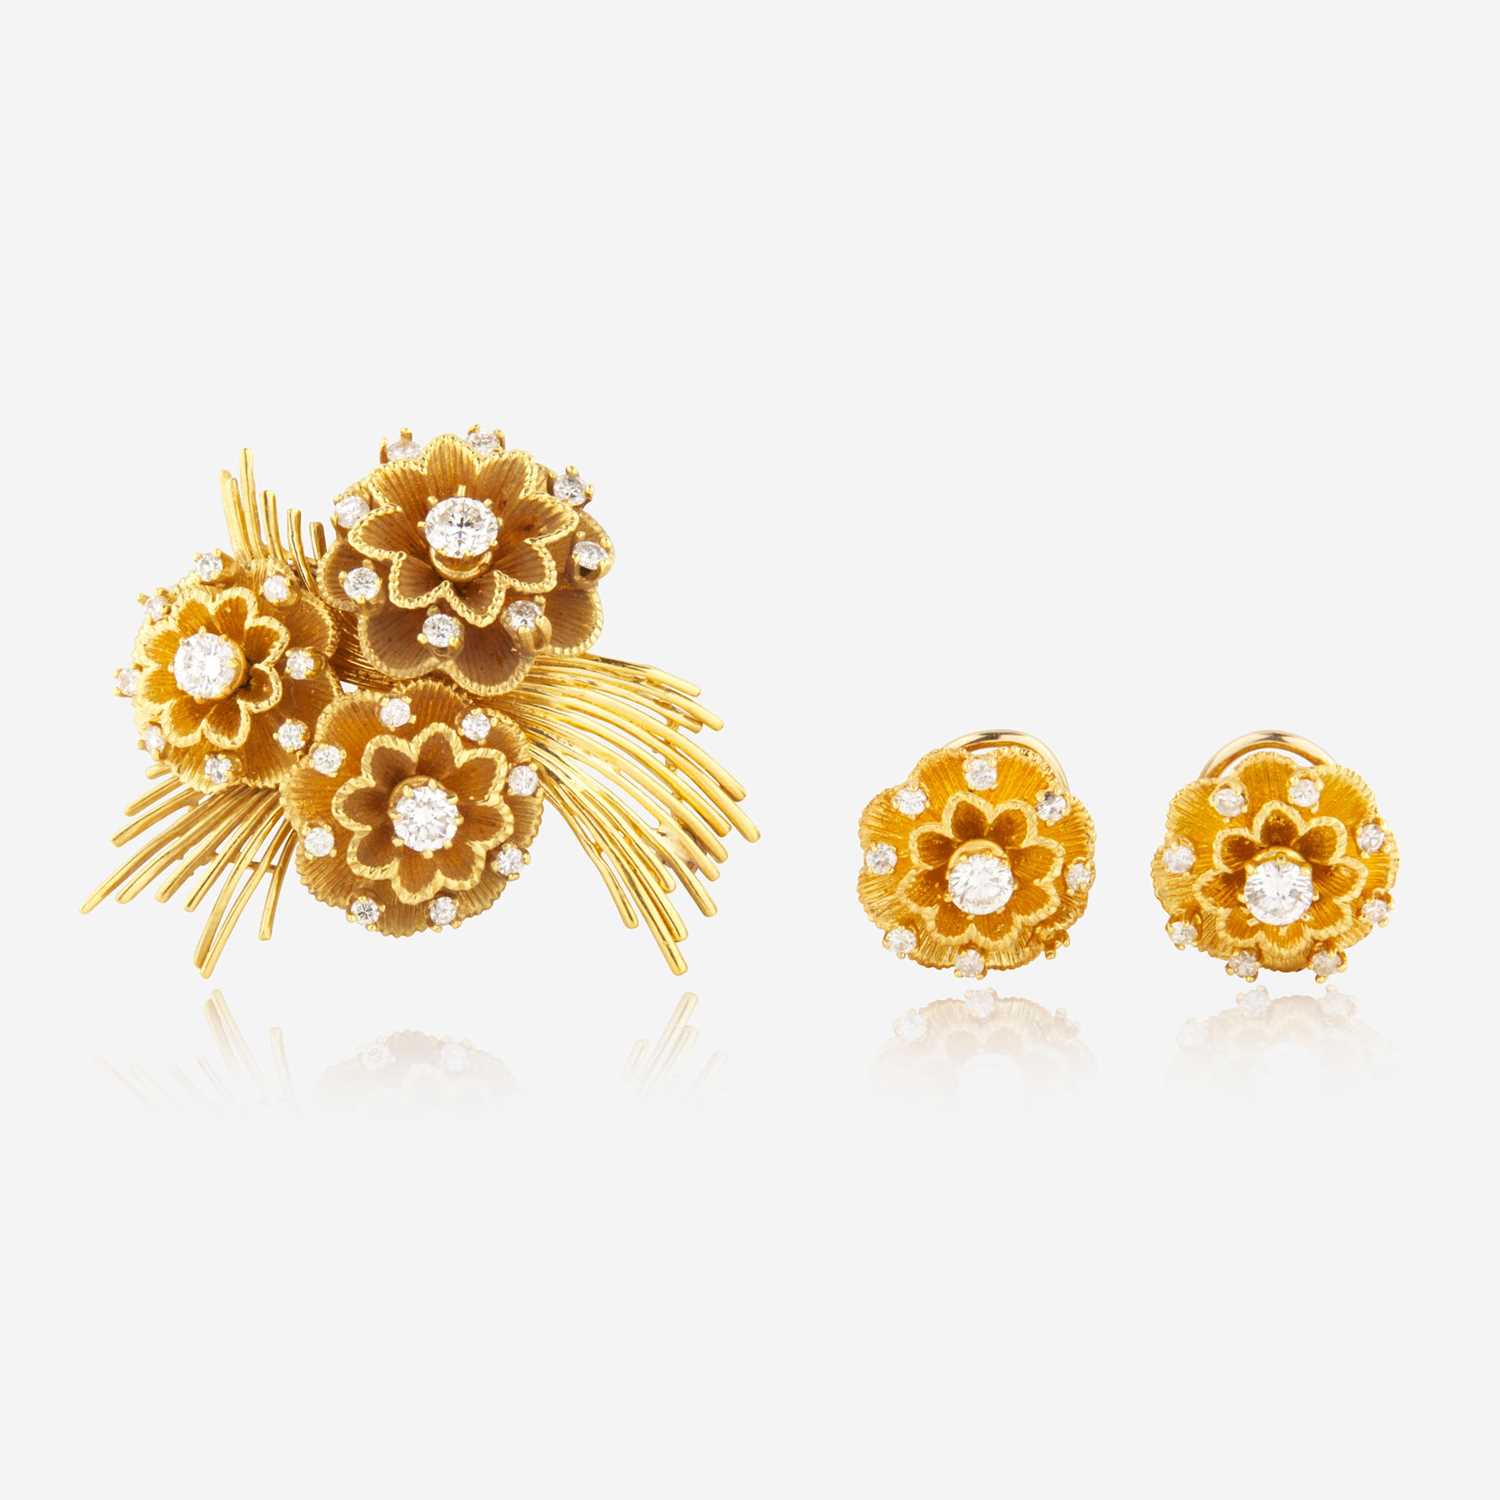 Lot 86 - A Matching Set of 14K Yellow Gold and Diamond Earrings and Brooch